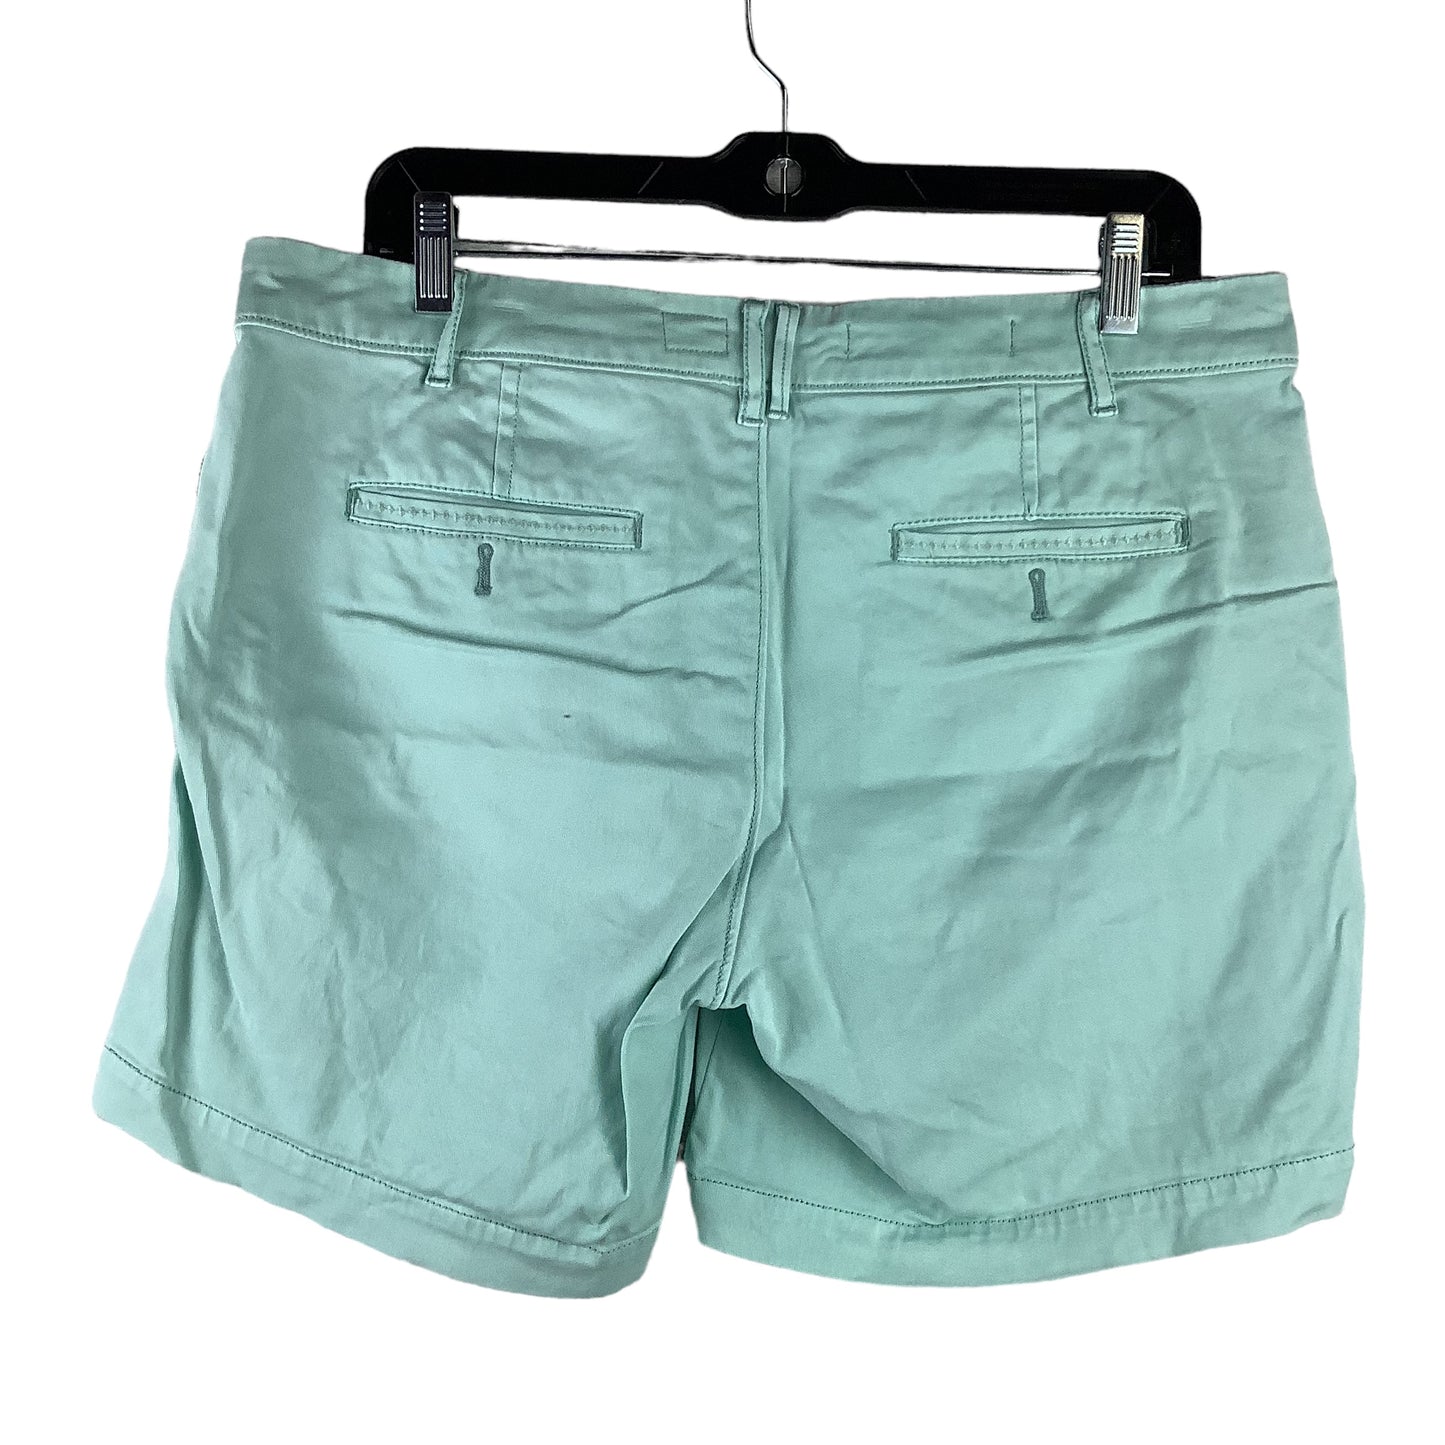 Shorts By Pilcro  Size: 6